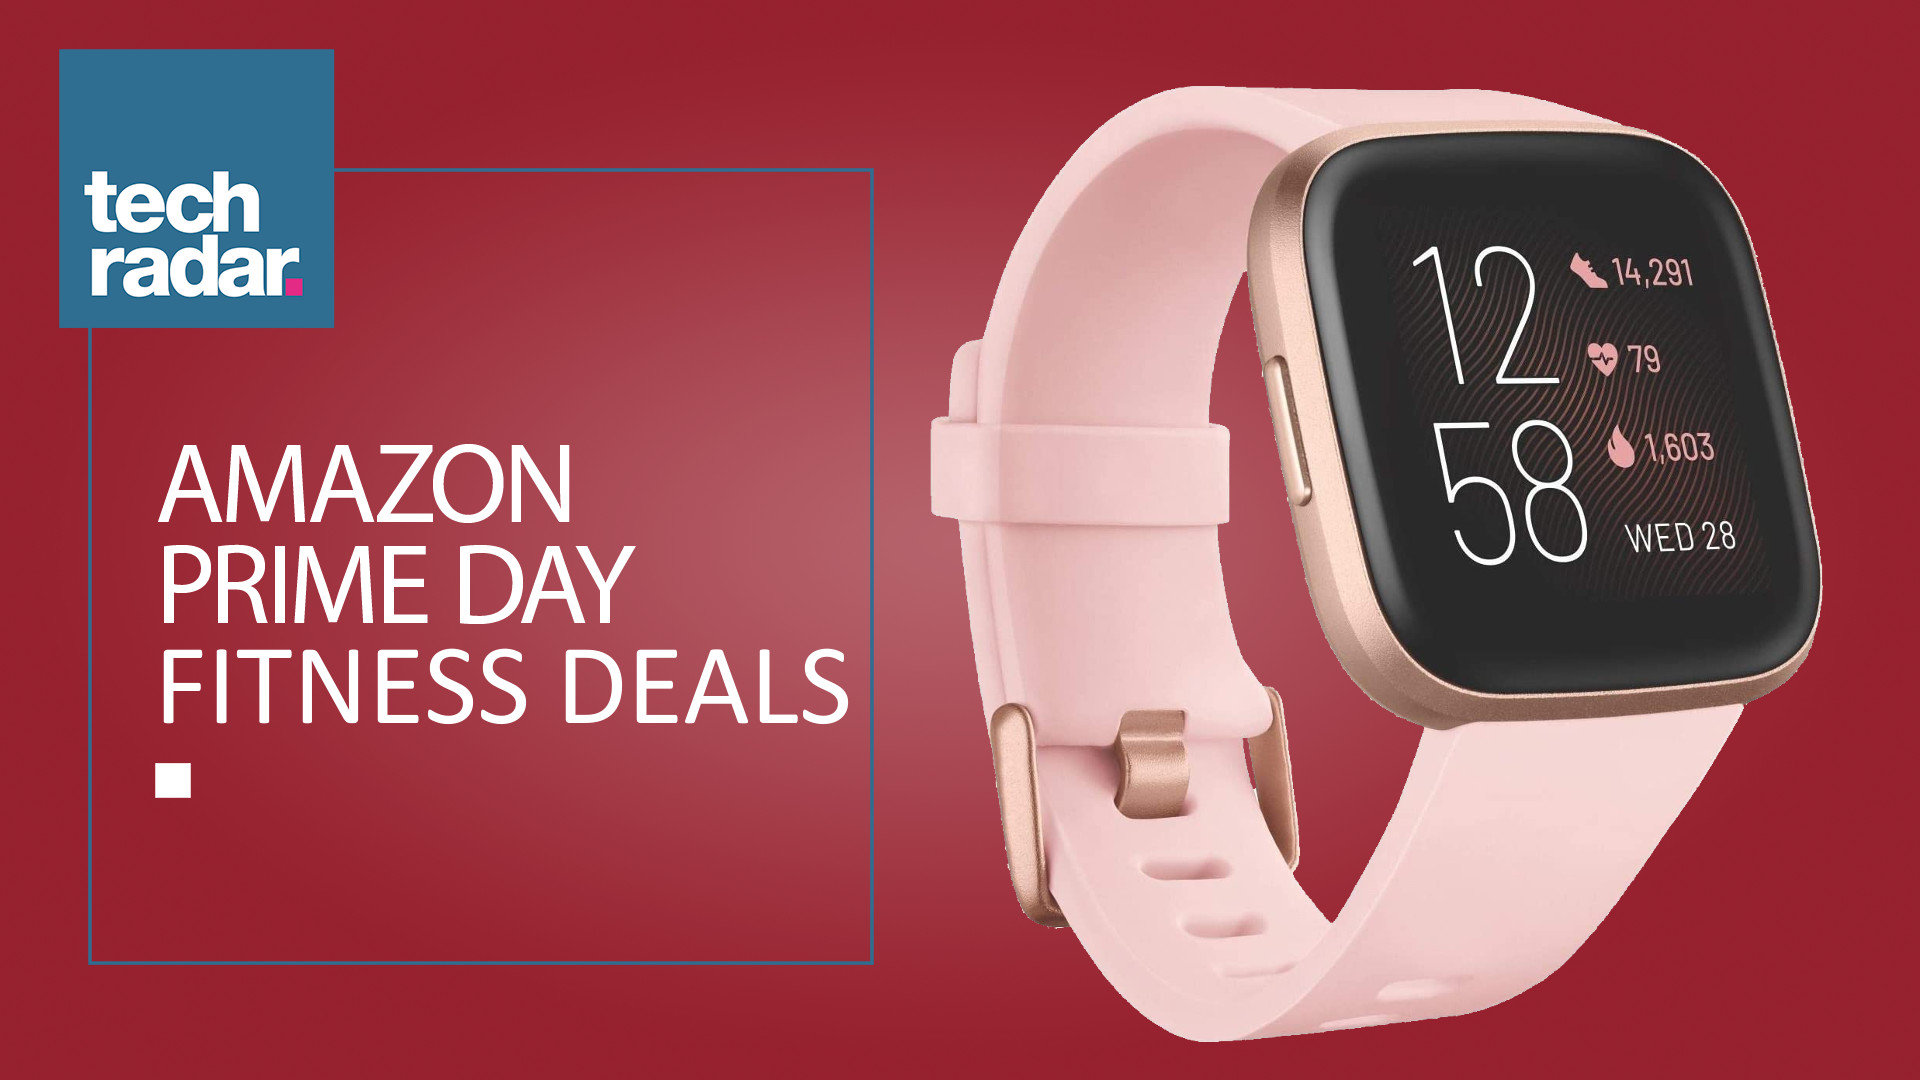 Amazon Prime Day fitness deals: the 